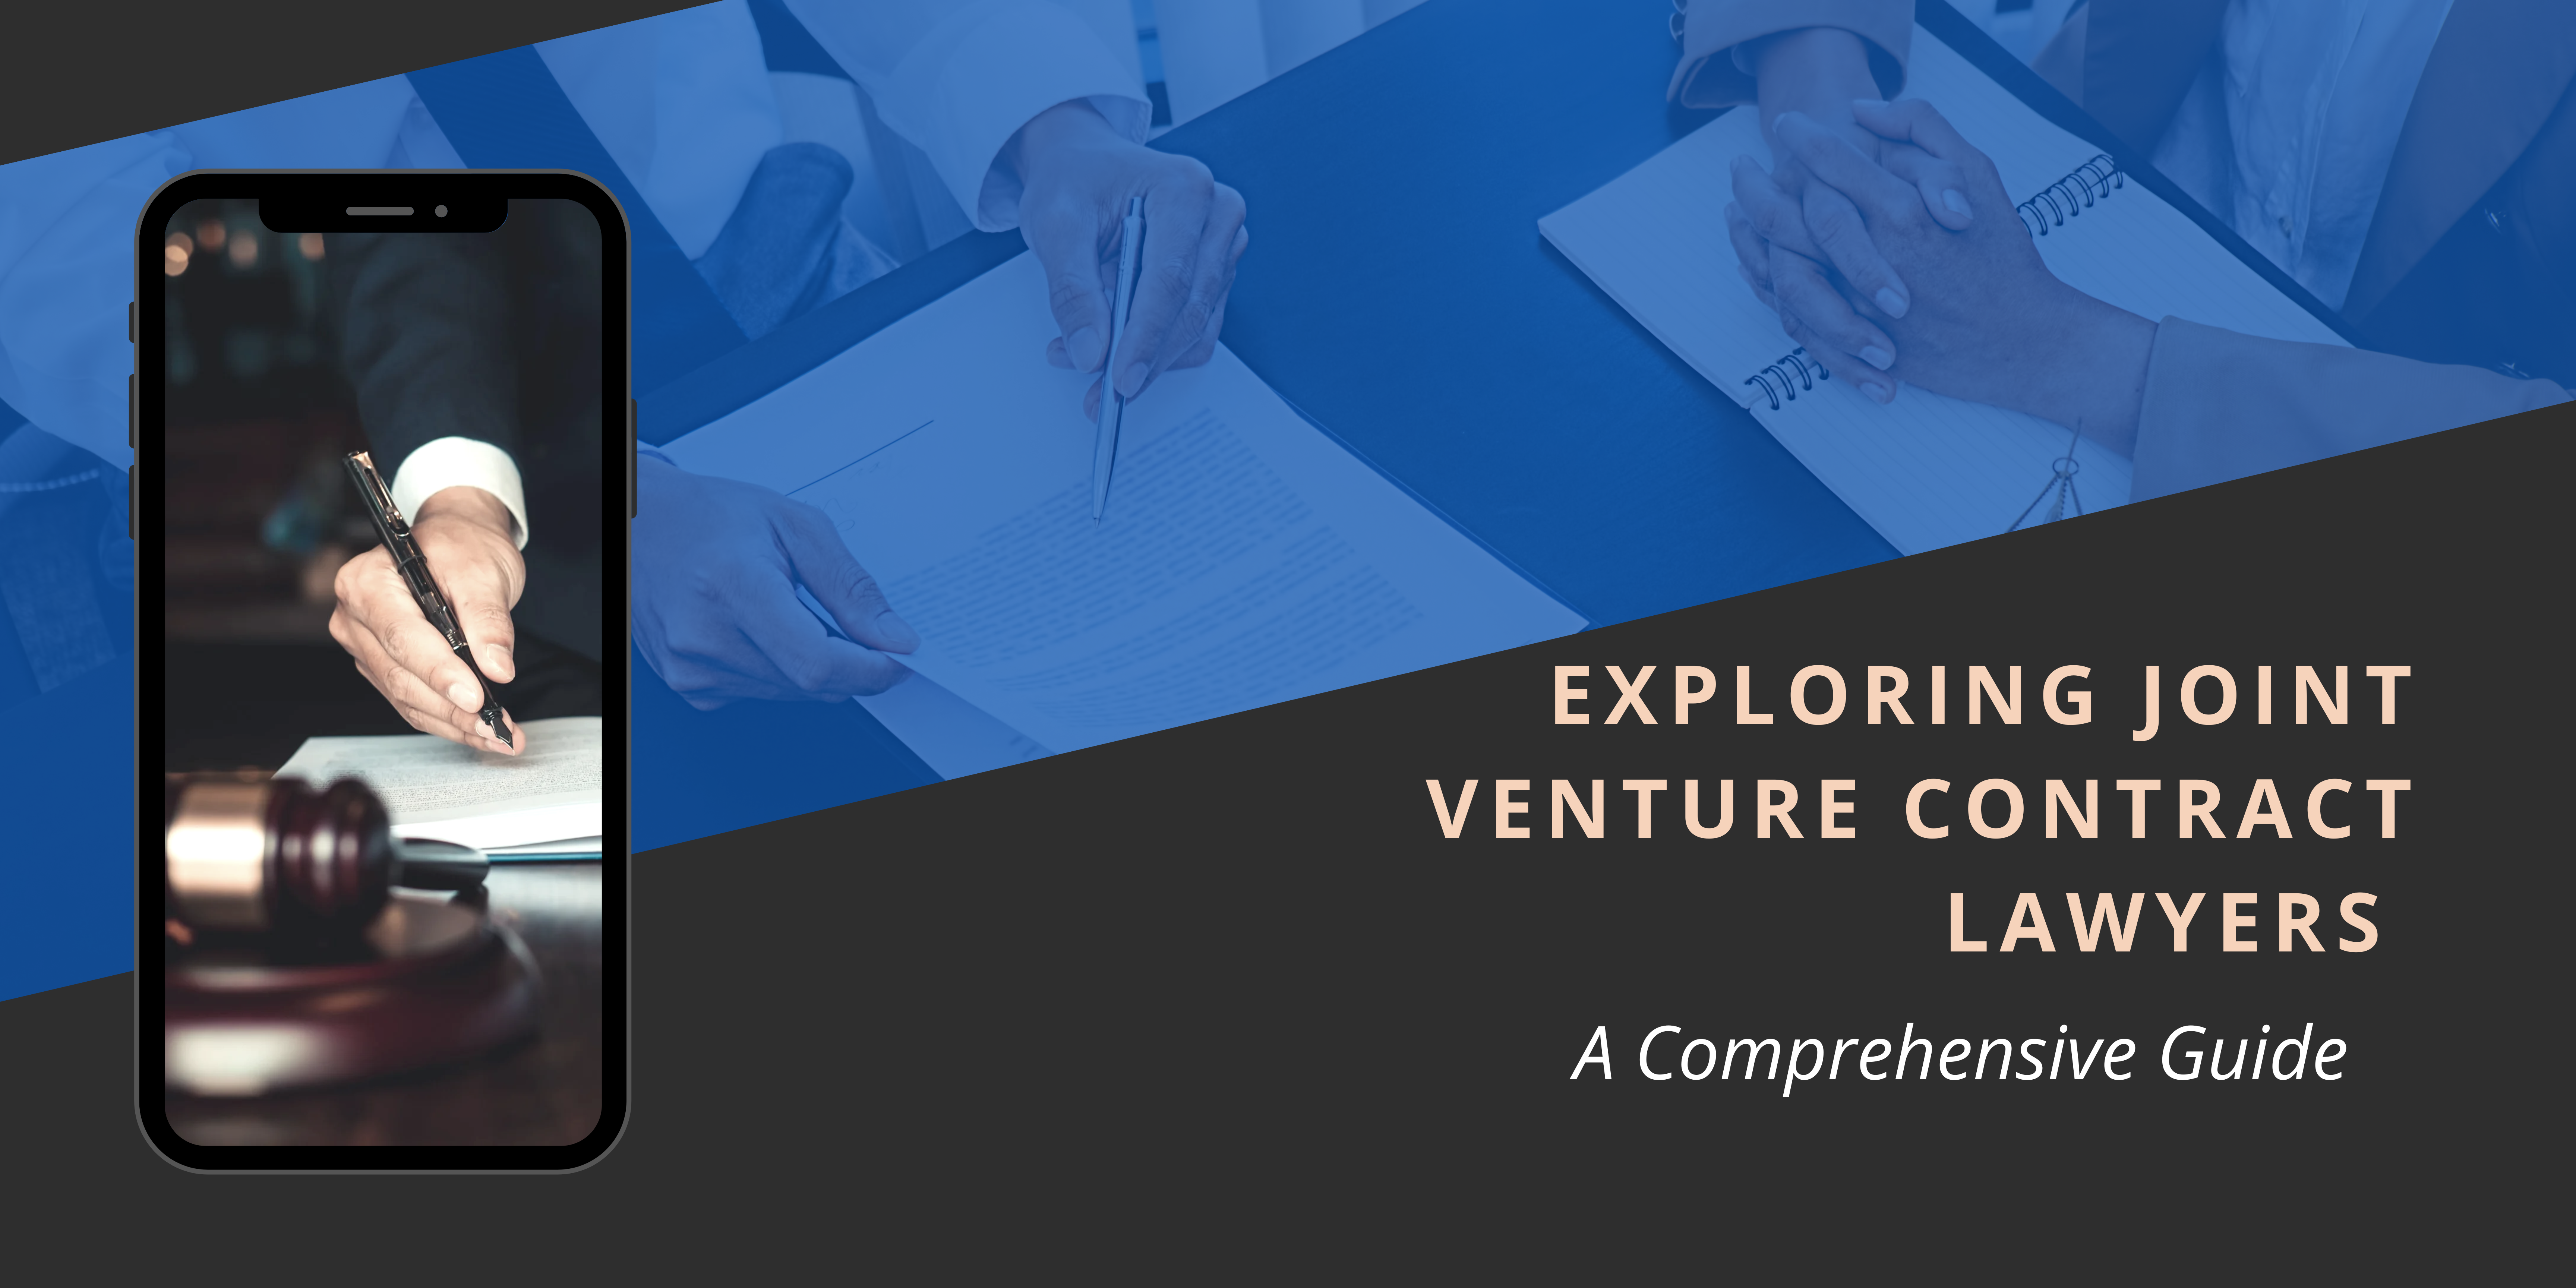 Exploring Joint Venture Contract Lawyers: A Comprehensive Guide